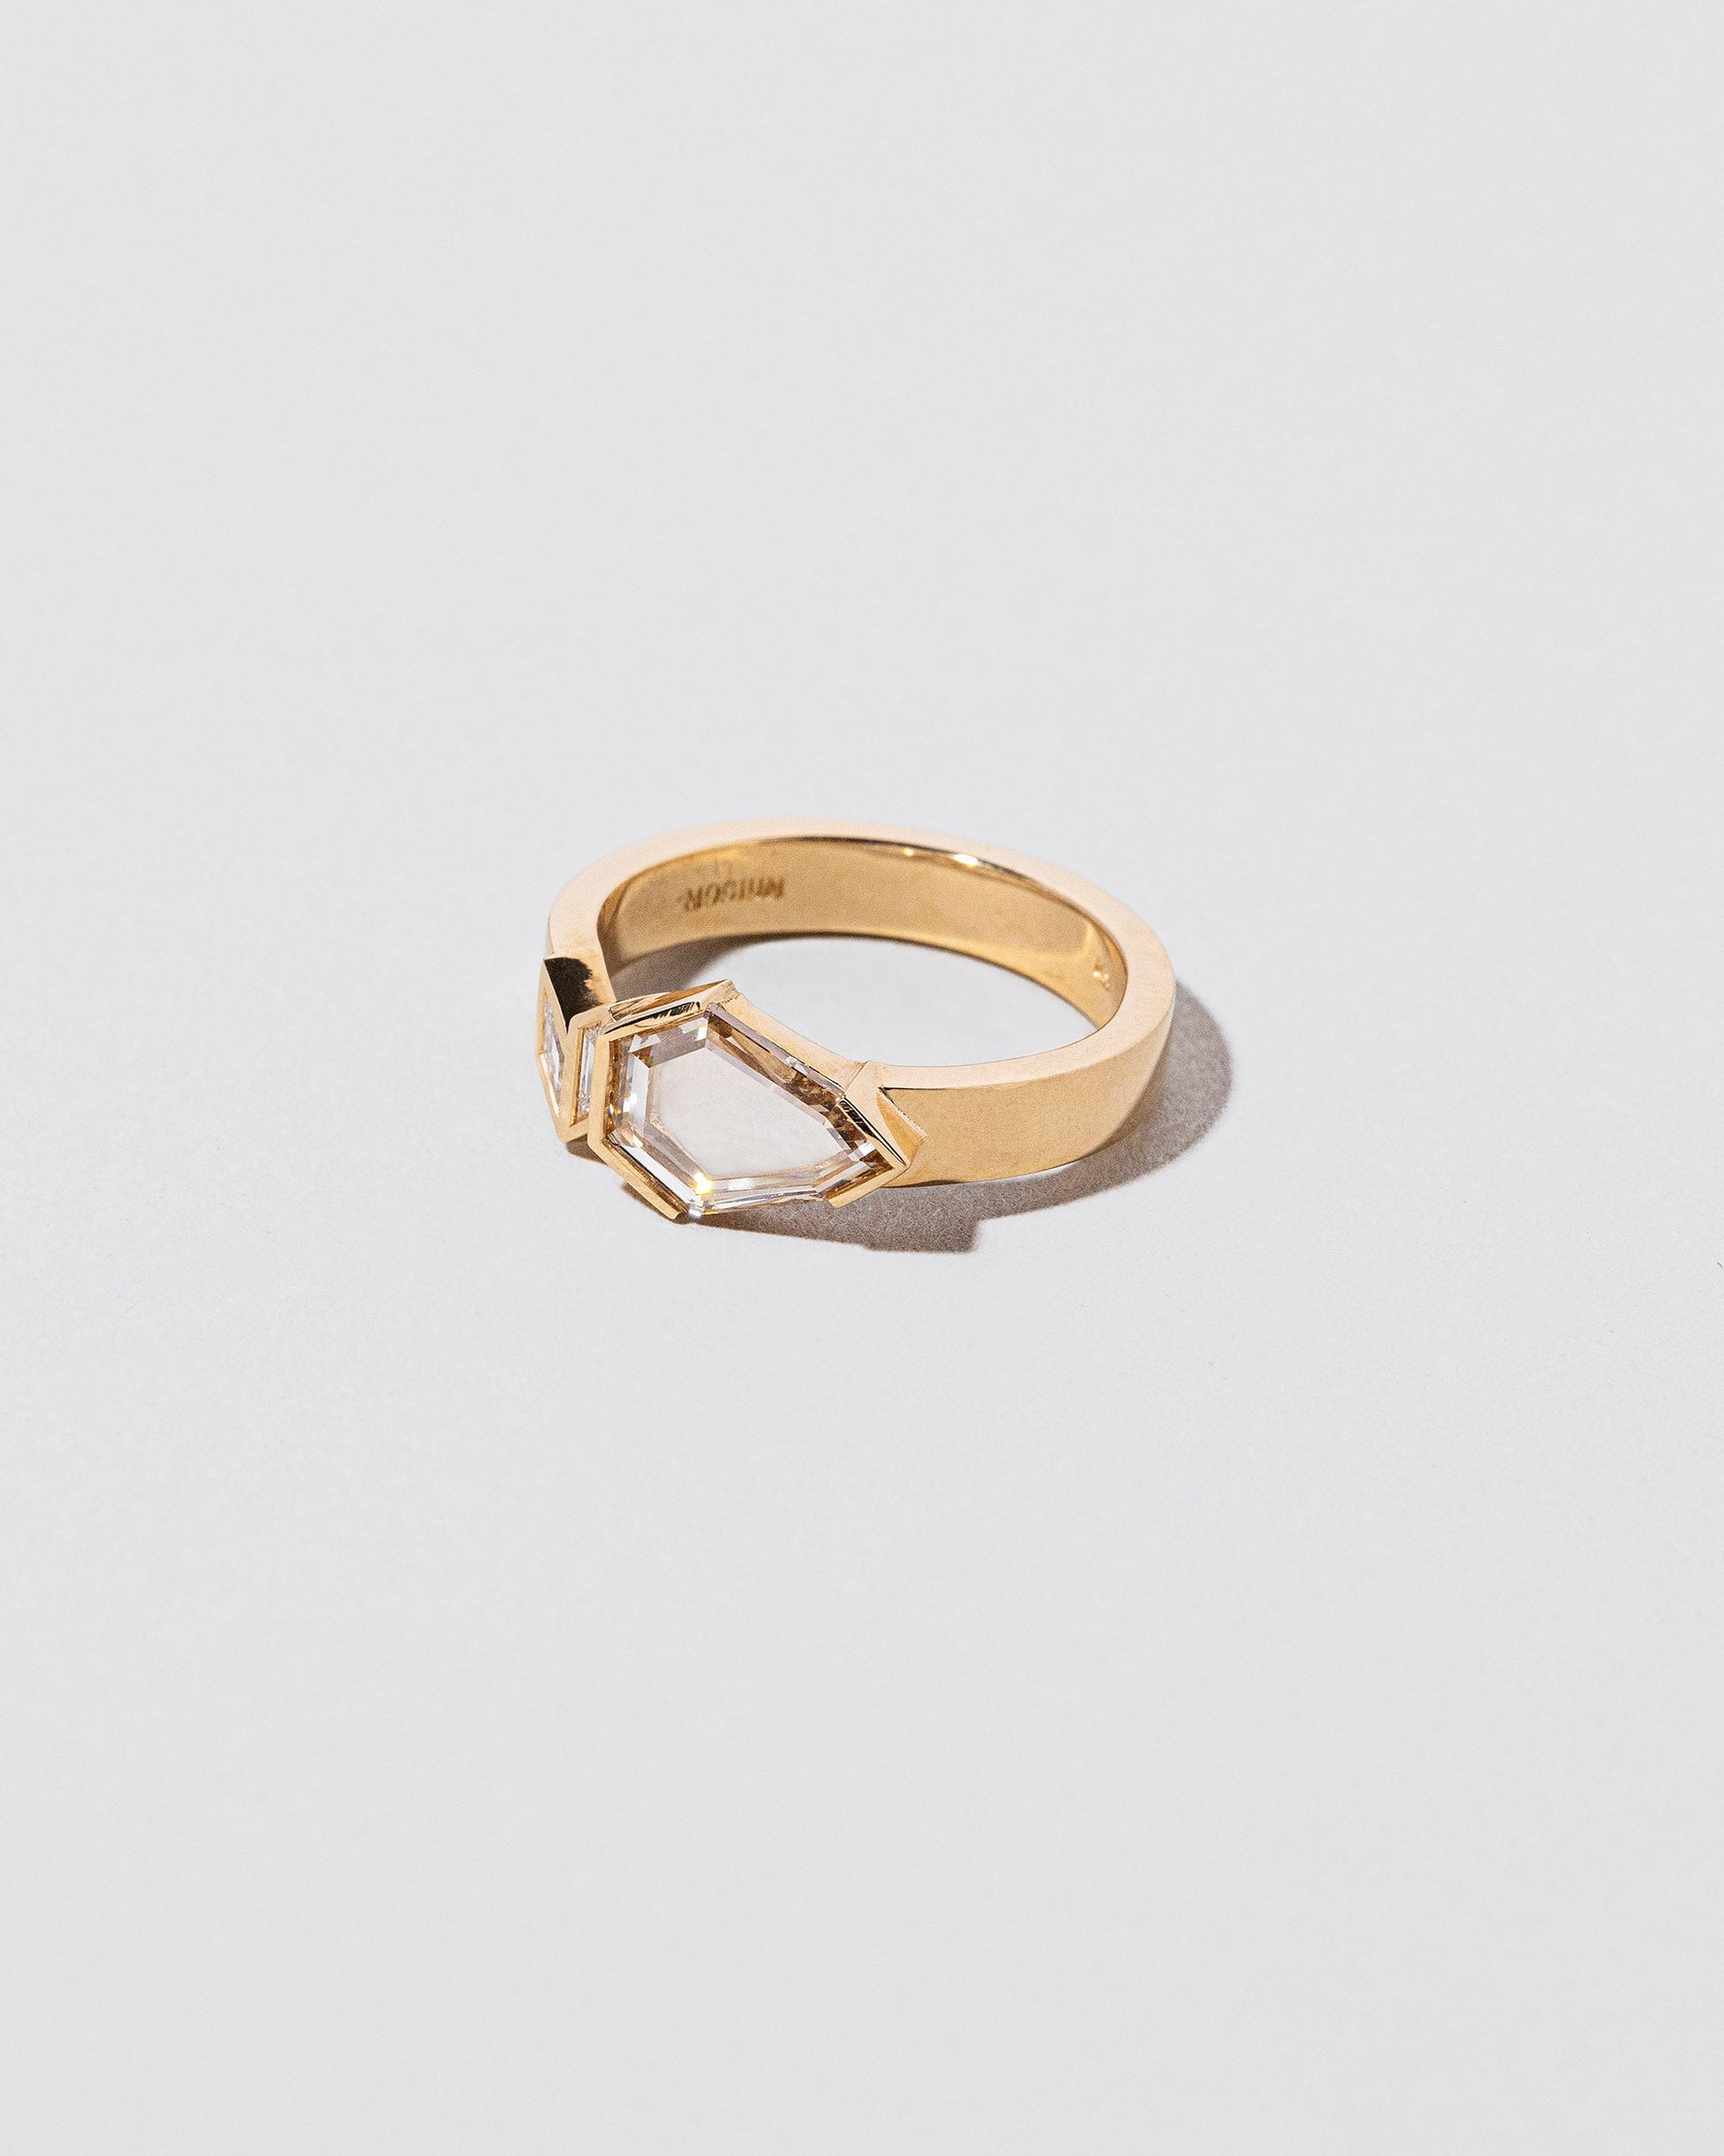 Intention Ring on light colored background.